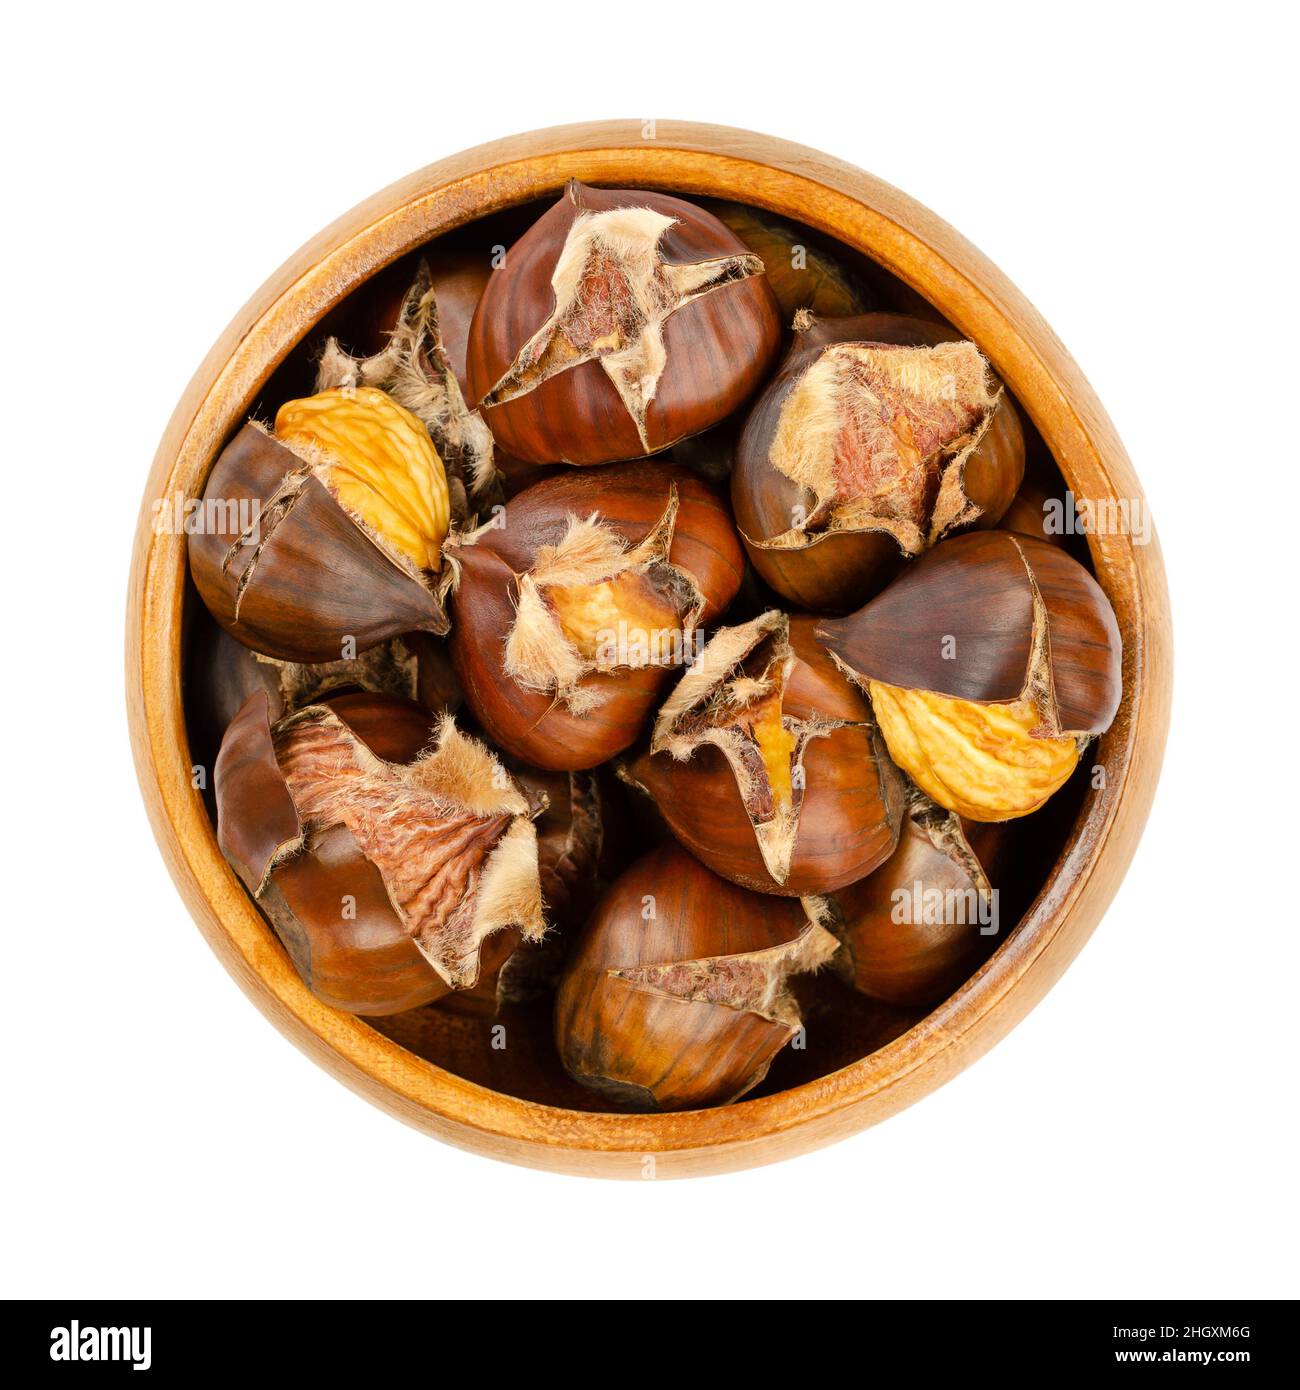 Freshly roasted chestnuts, in a wooden bowl. Popular autumn and winter street food in East Asia, Europe, and New York City. European sweet chestnuts. Stock Photo